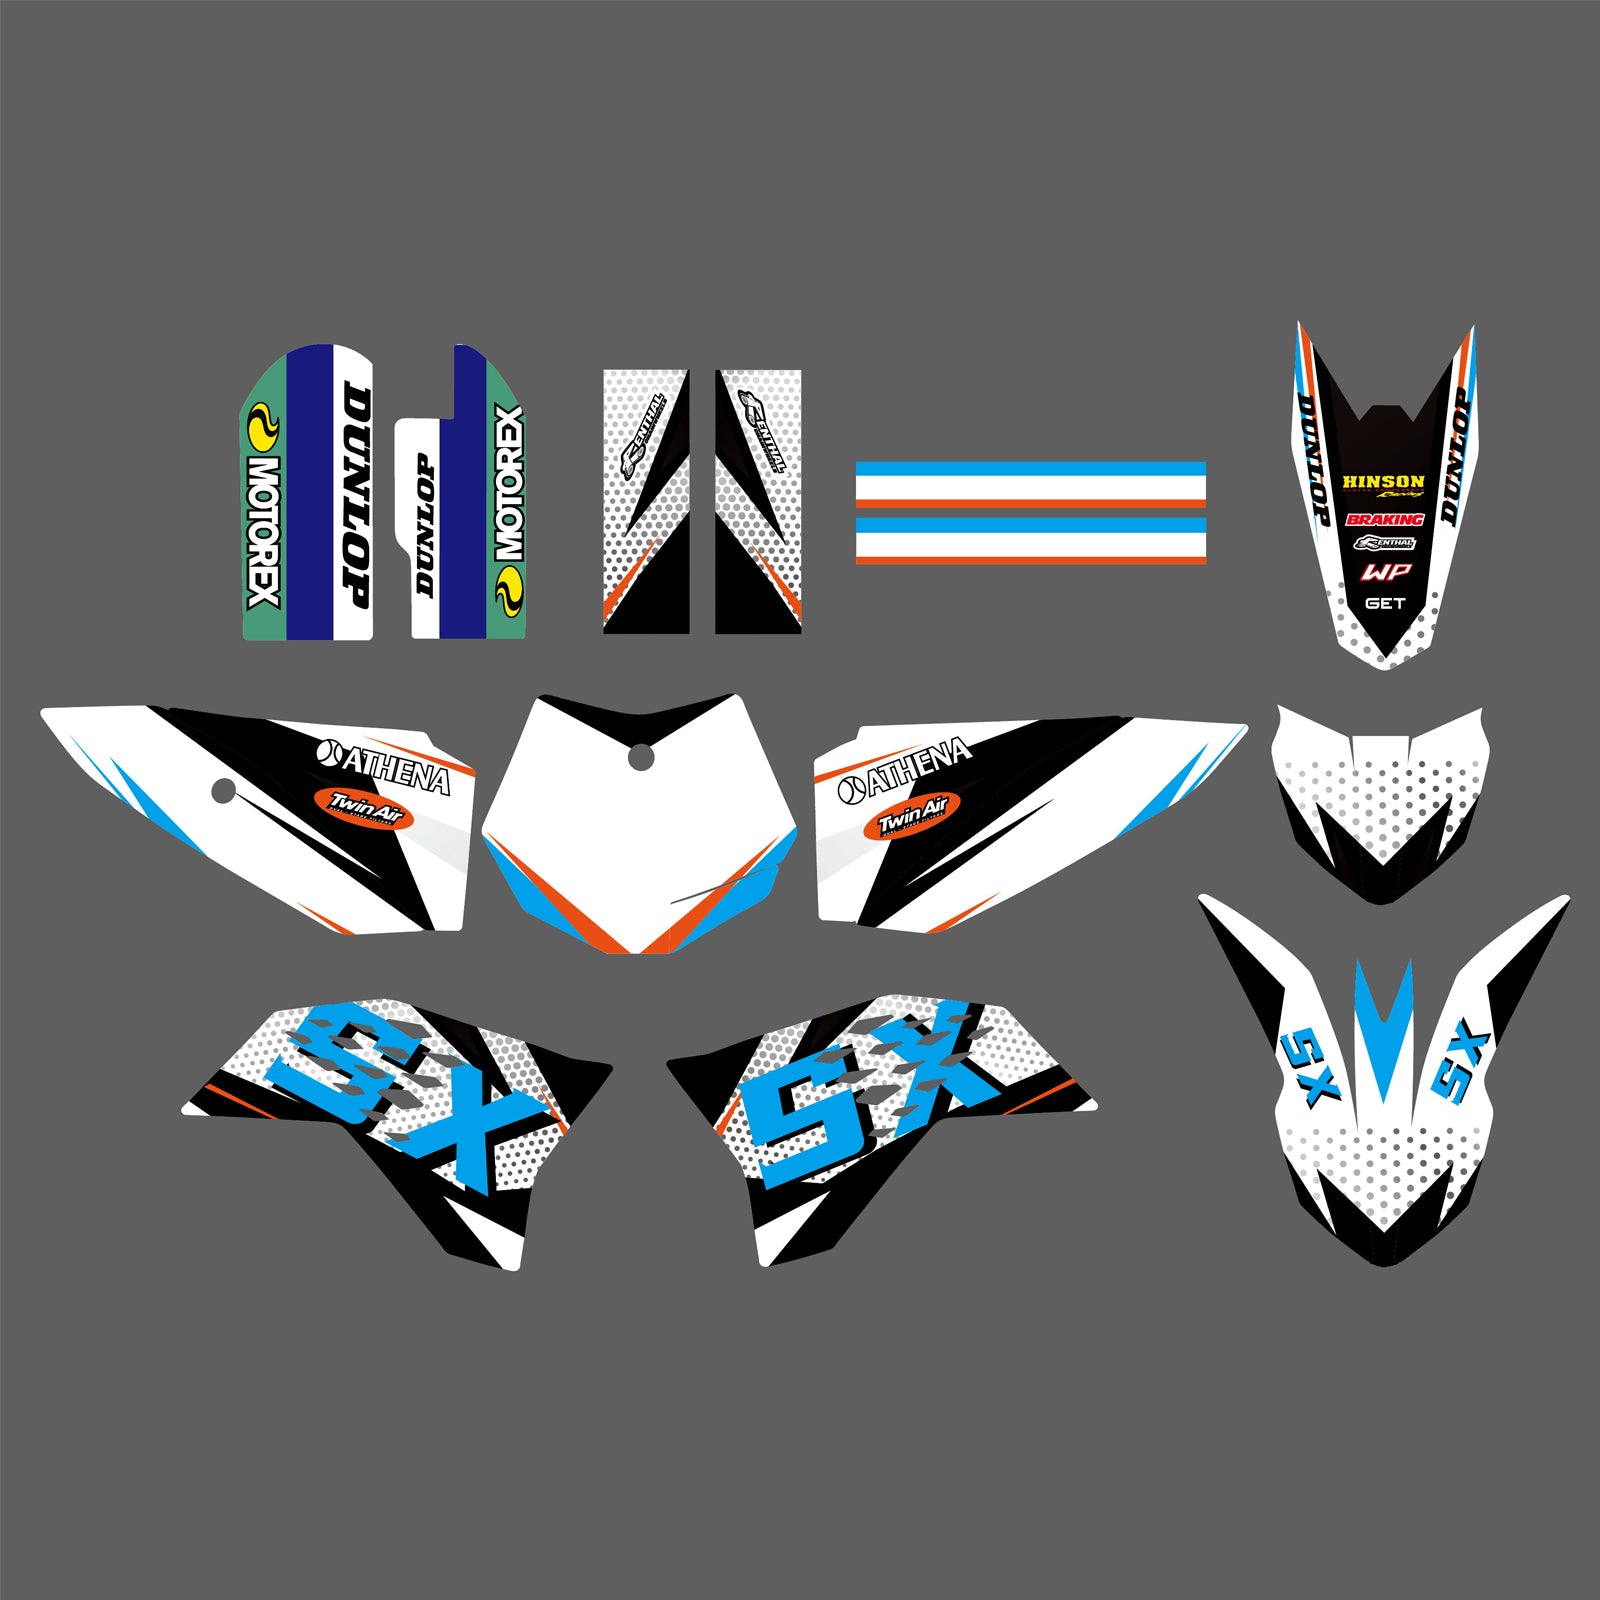 Motorcycle Graphics Background Decals Stickers Kits for KTM SX65 2009-2015